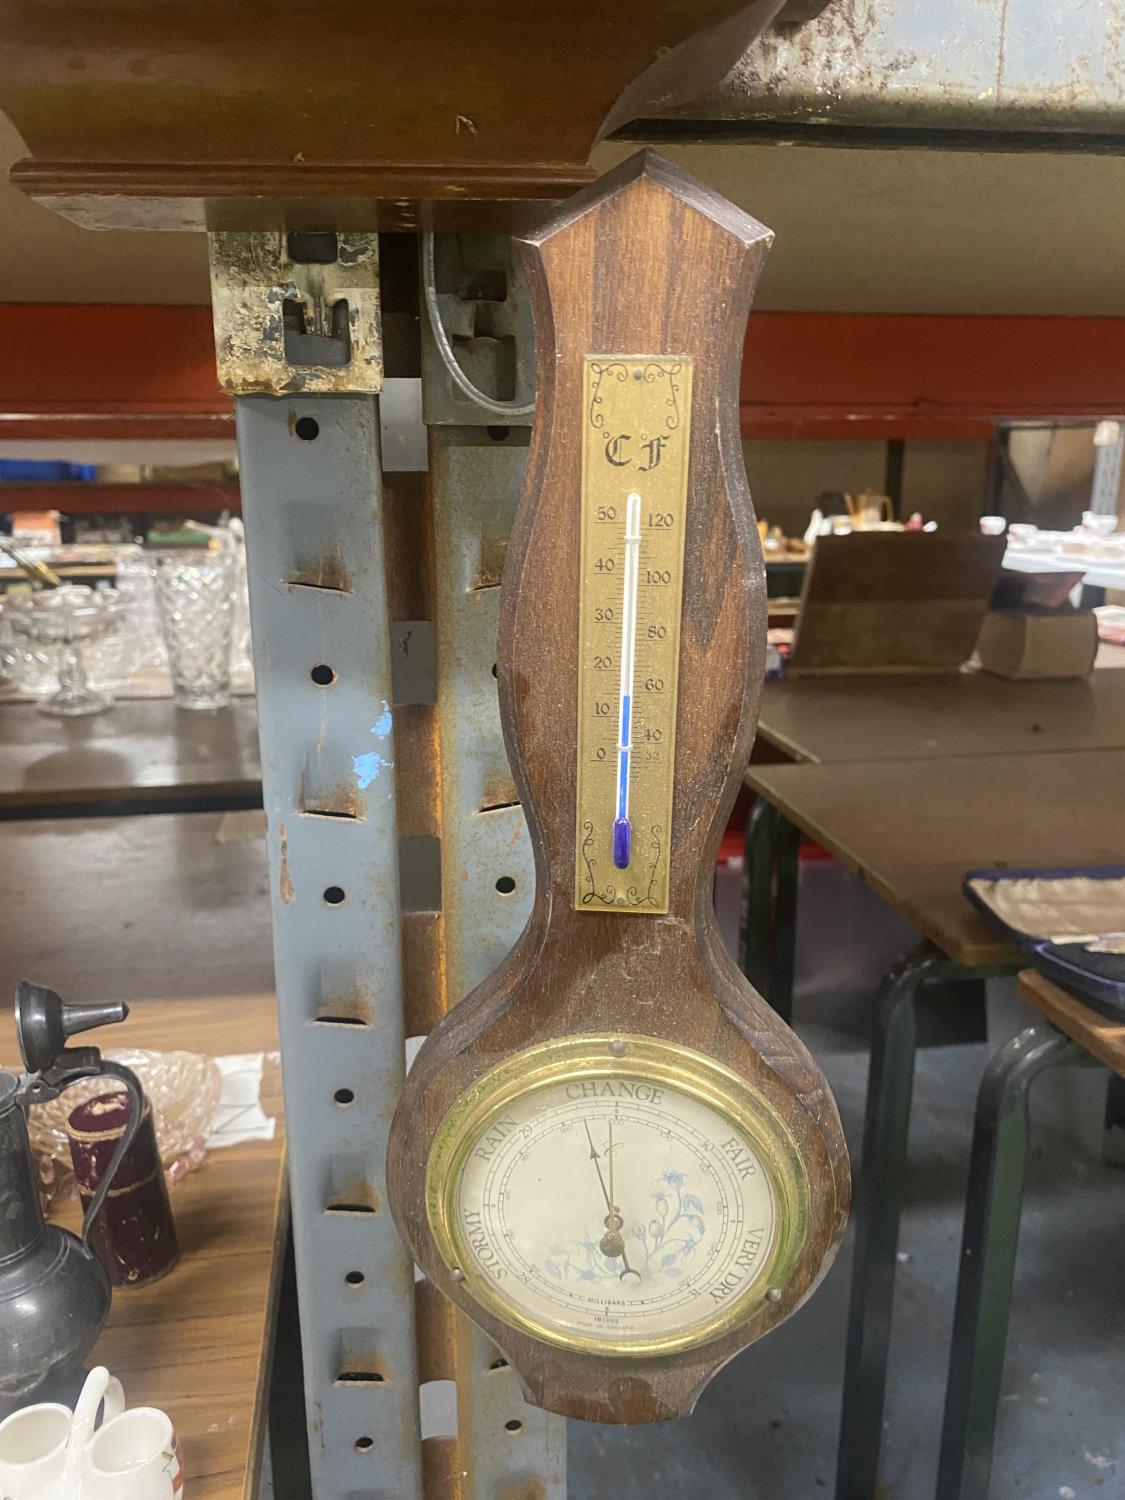 A MAHOGANY CASED WESTMINSTER-WHITTINGTON WALL CLOCK AND A BAROMETER - Image 3 of 3